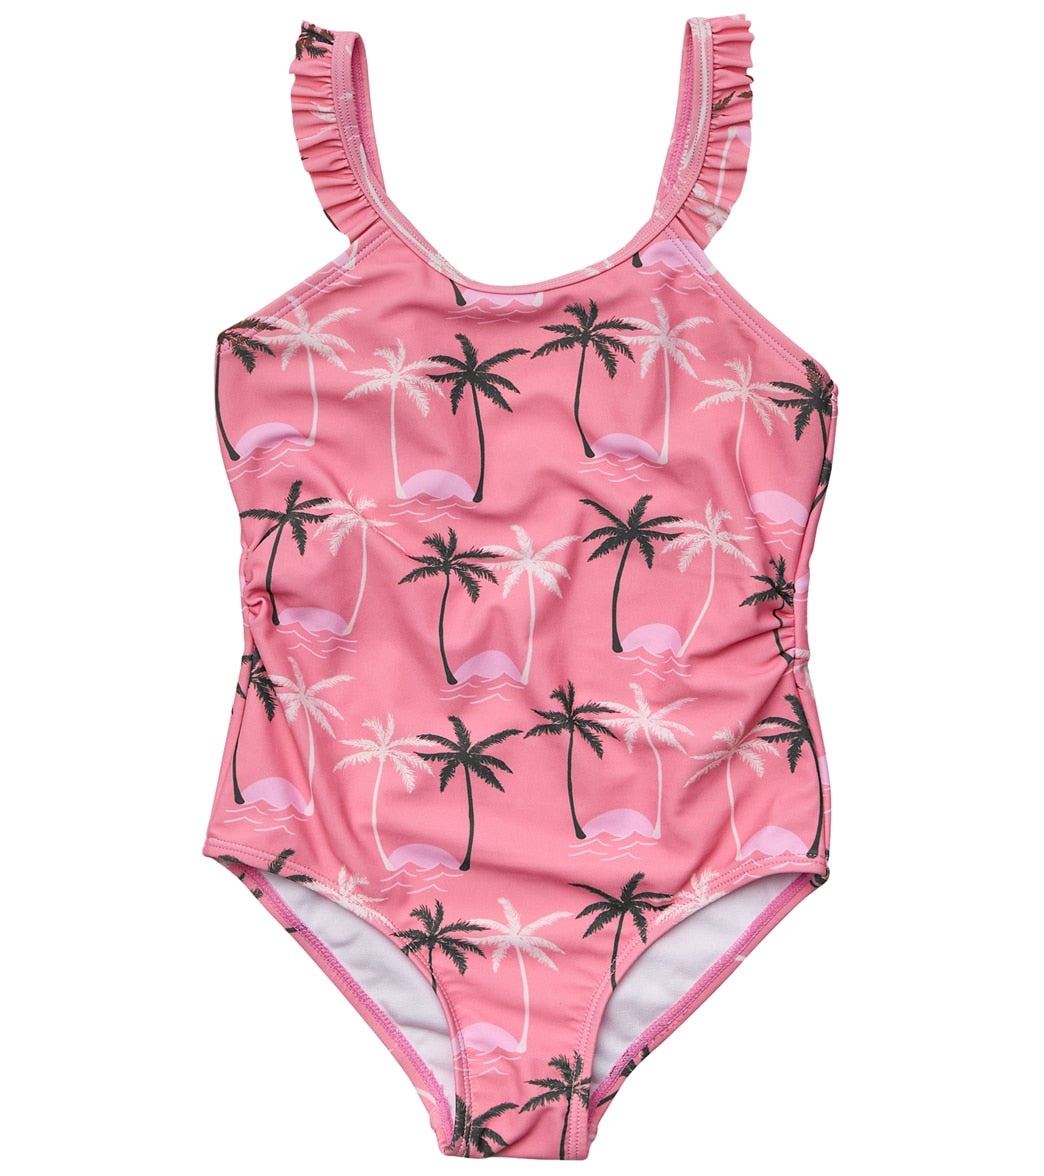 Snapper Rock Girls Palm Paradise Frill Strap One Piece Swimsuit (Toddler, Little Kid, Big Kid)